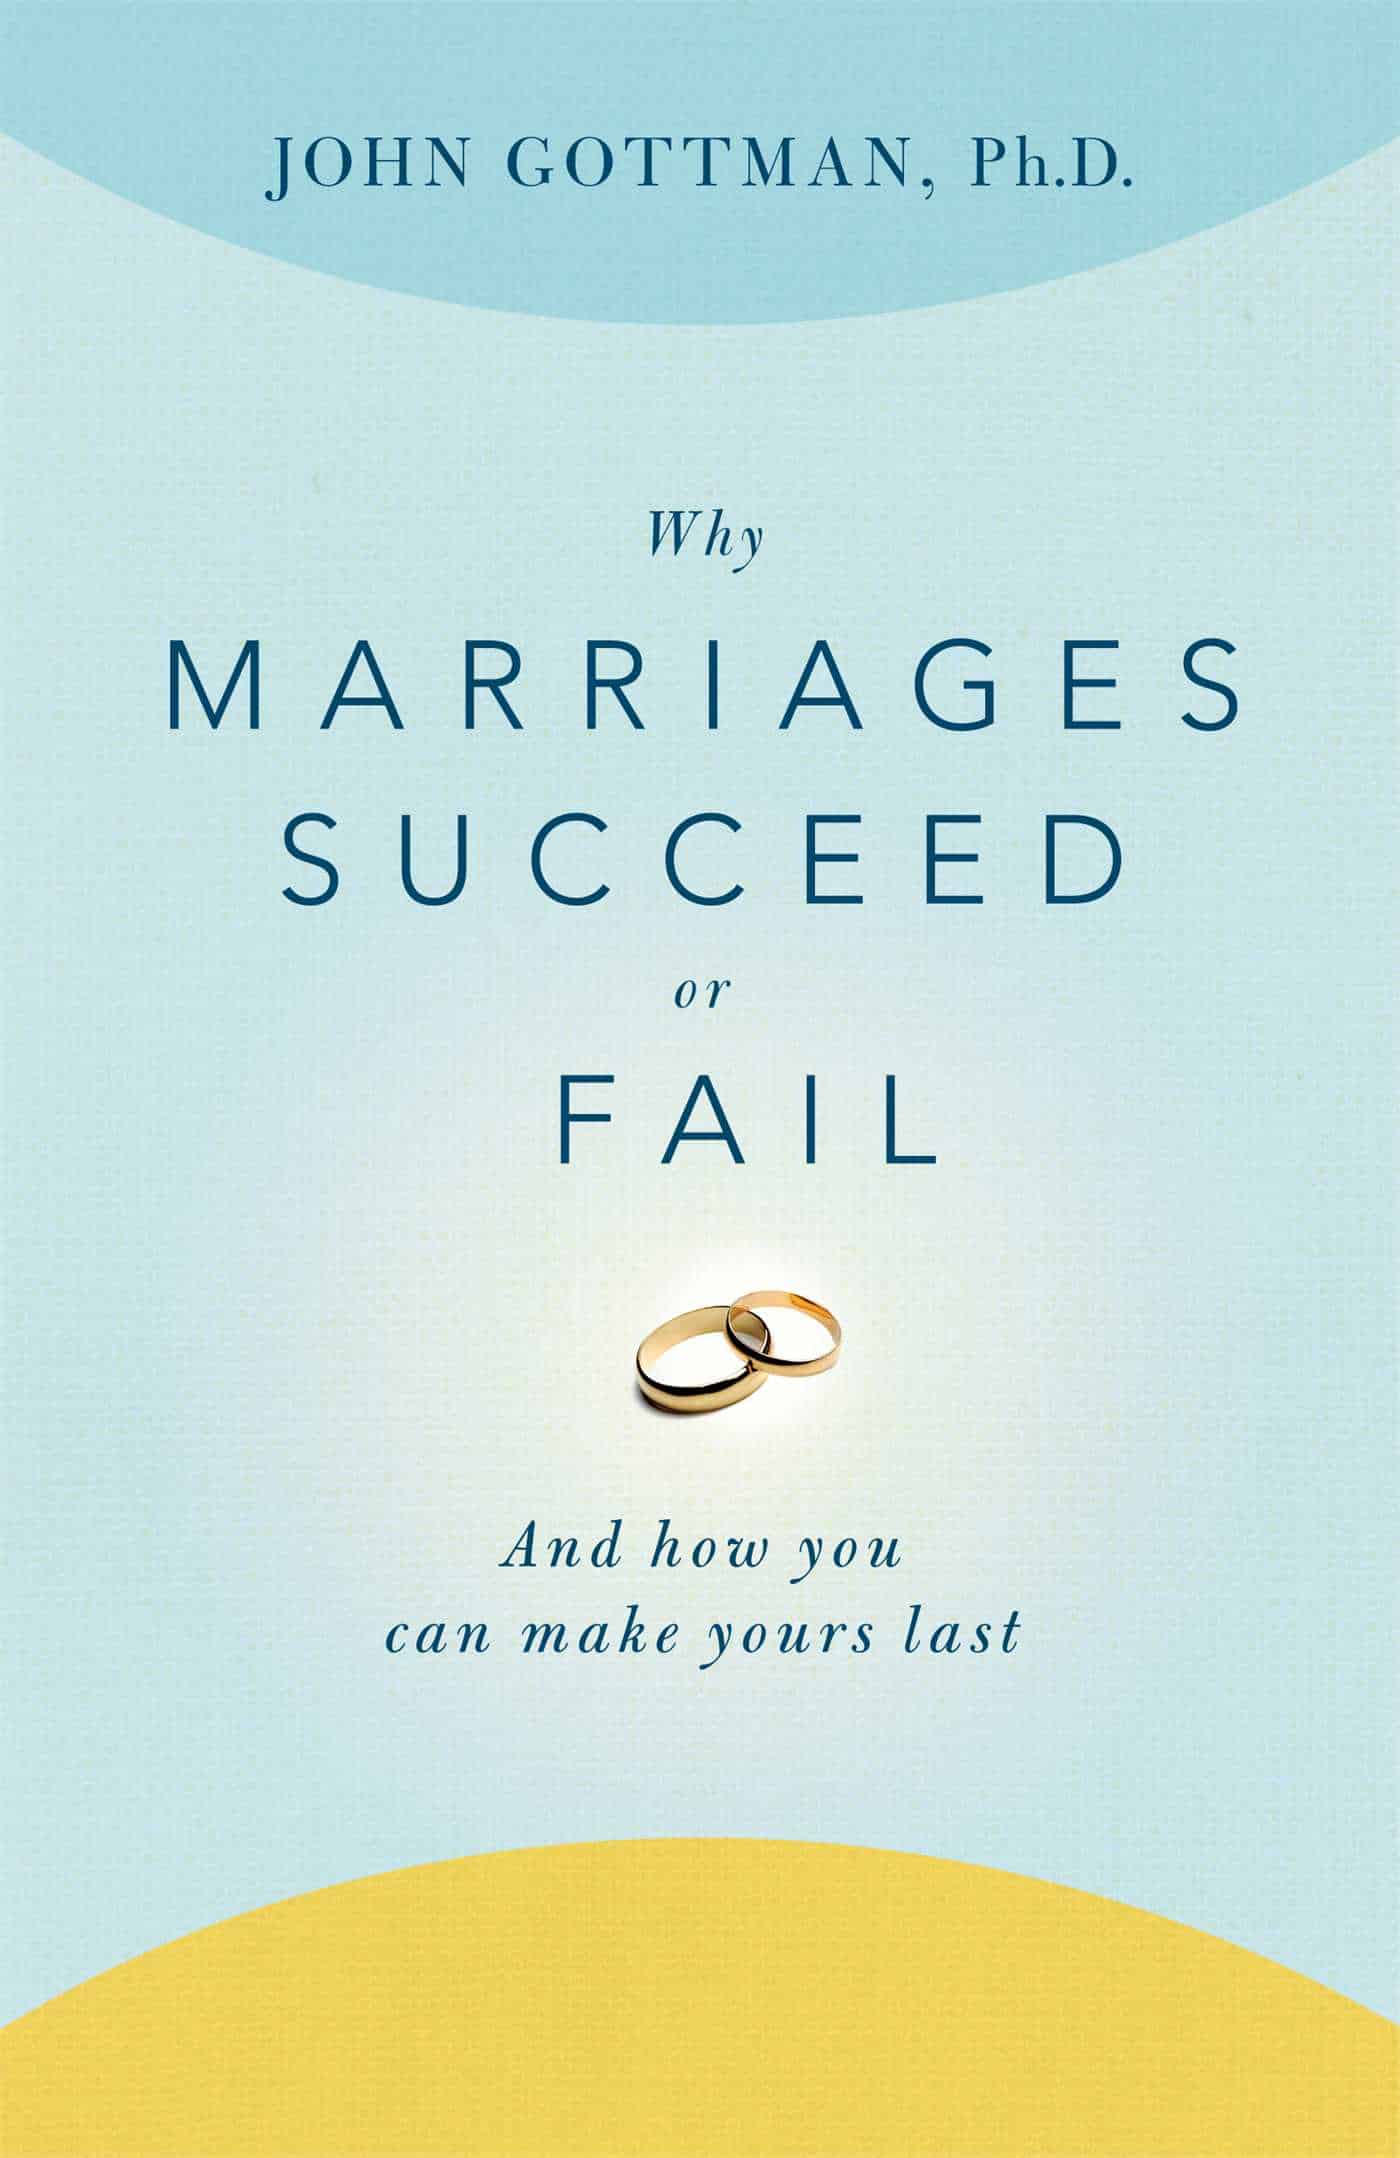 Why Marriages Succeed or Fail By John Gottman